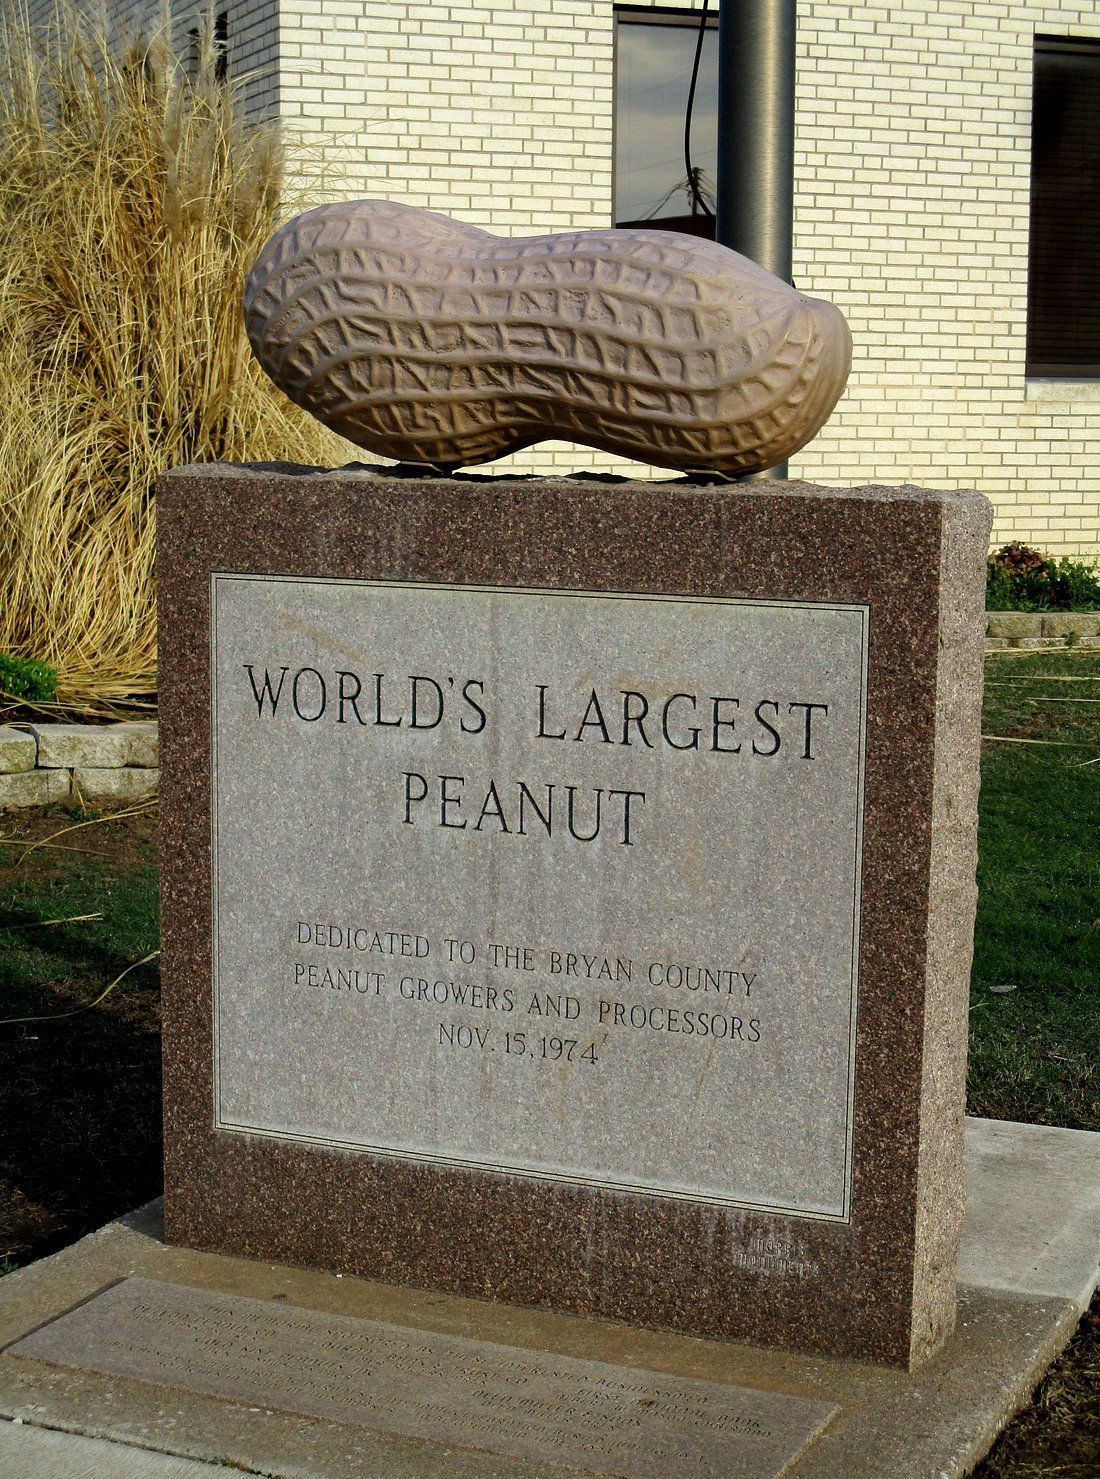  World's Largest Peanut Sculpture: world record in Durant, Oklahoma